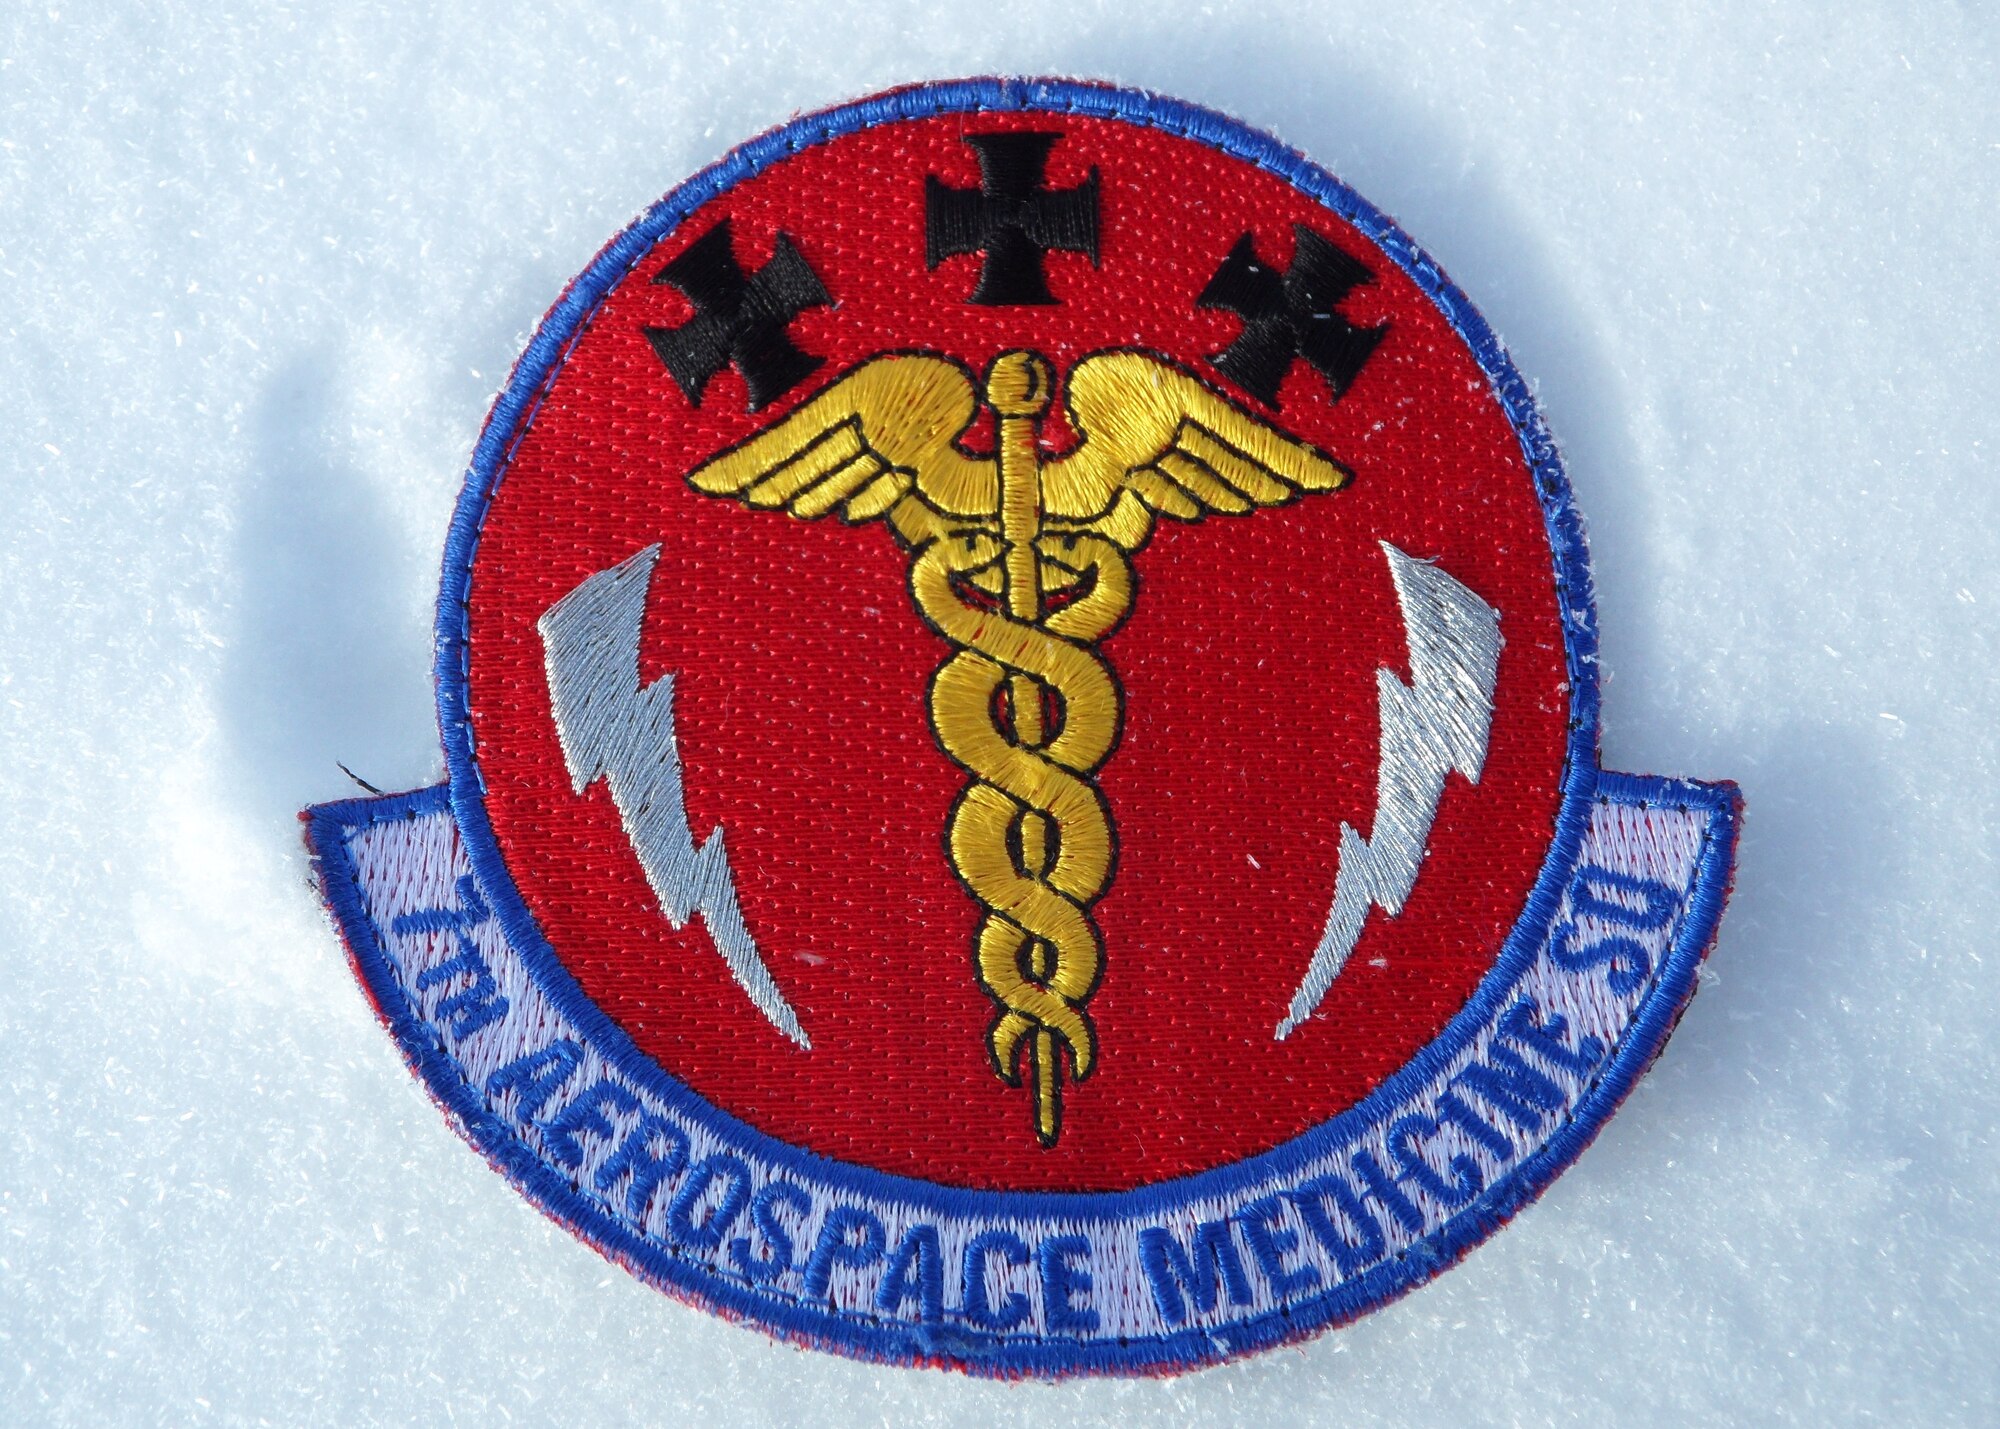 The 7th Aerospace Medicine Squadron patch lies in the snow beneath the South Pole Jan. 10, 2014, at Amundsen-Scott South Pole Station, Antarctica. Maj. Andrew Allen, 7th AMDS, deployed to McMurdo Station in support of Operation Deep Freeze. While stationed there, Allen’s primary mission was to support the flying mission, casualty evacuations and patient movement across the continent. (Courtesy photo)